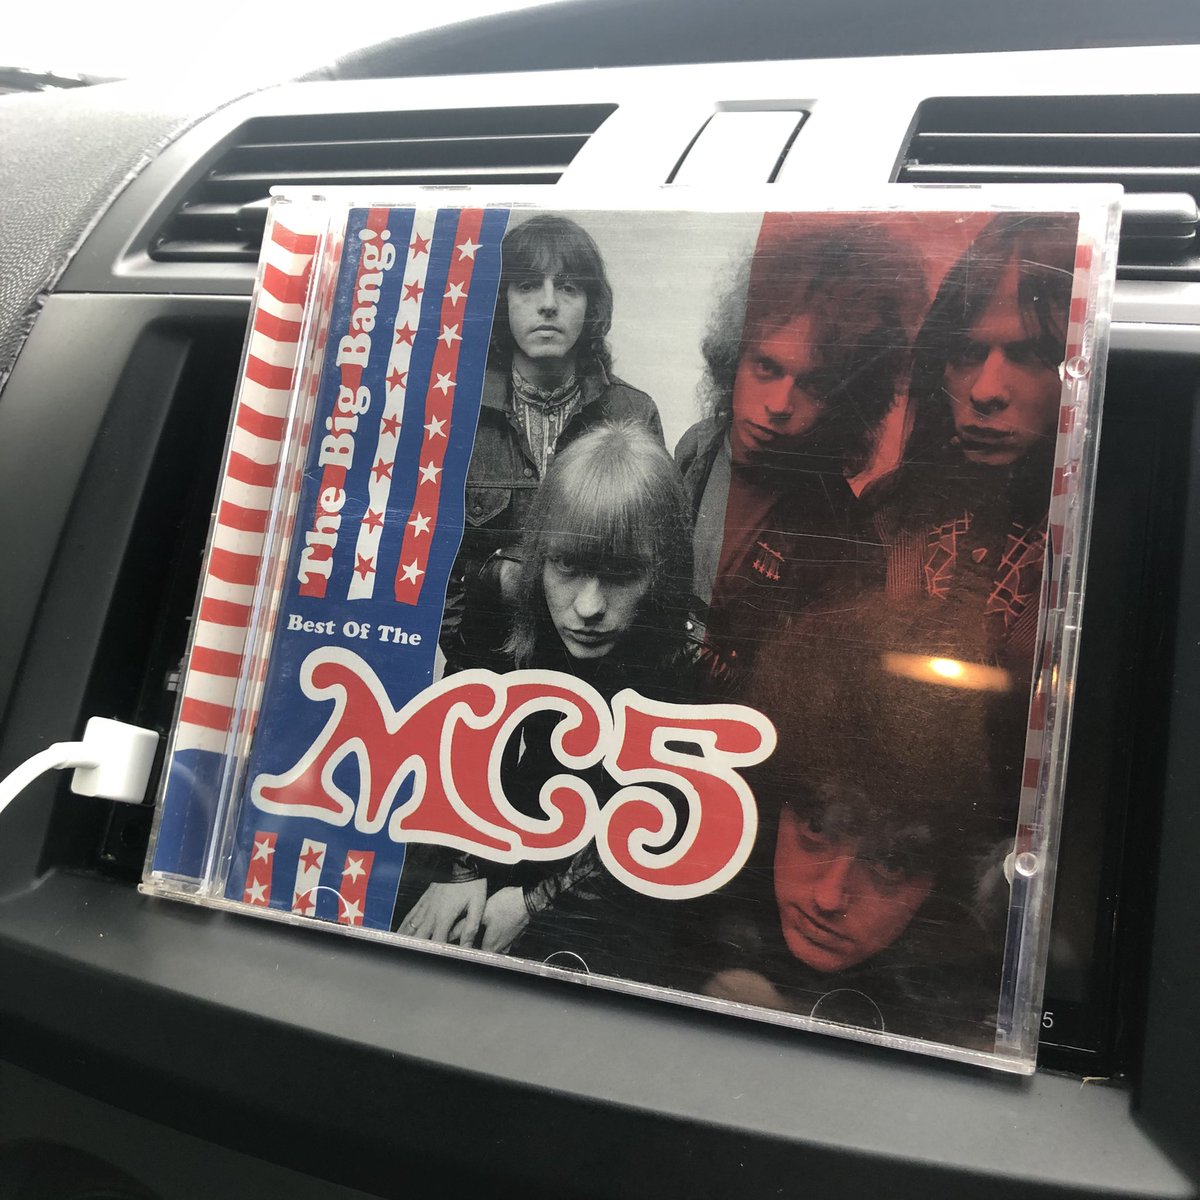 Listening to the MC5 on the drive to work